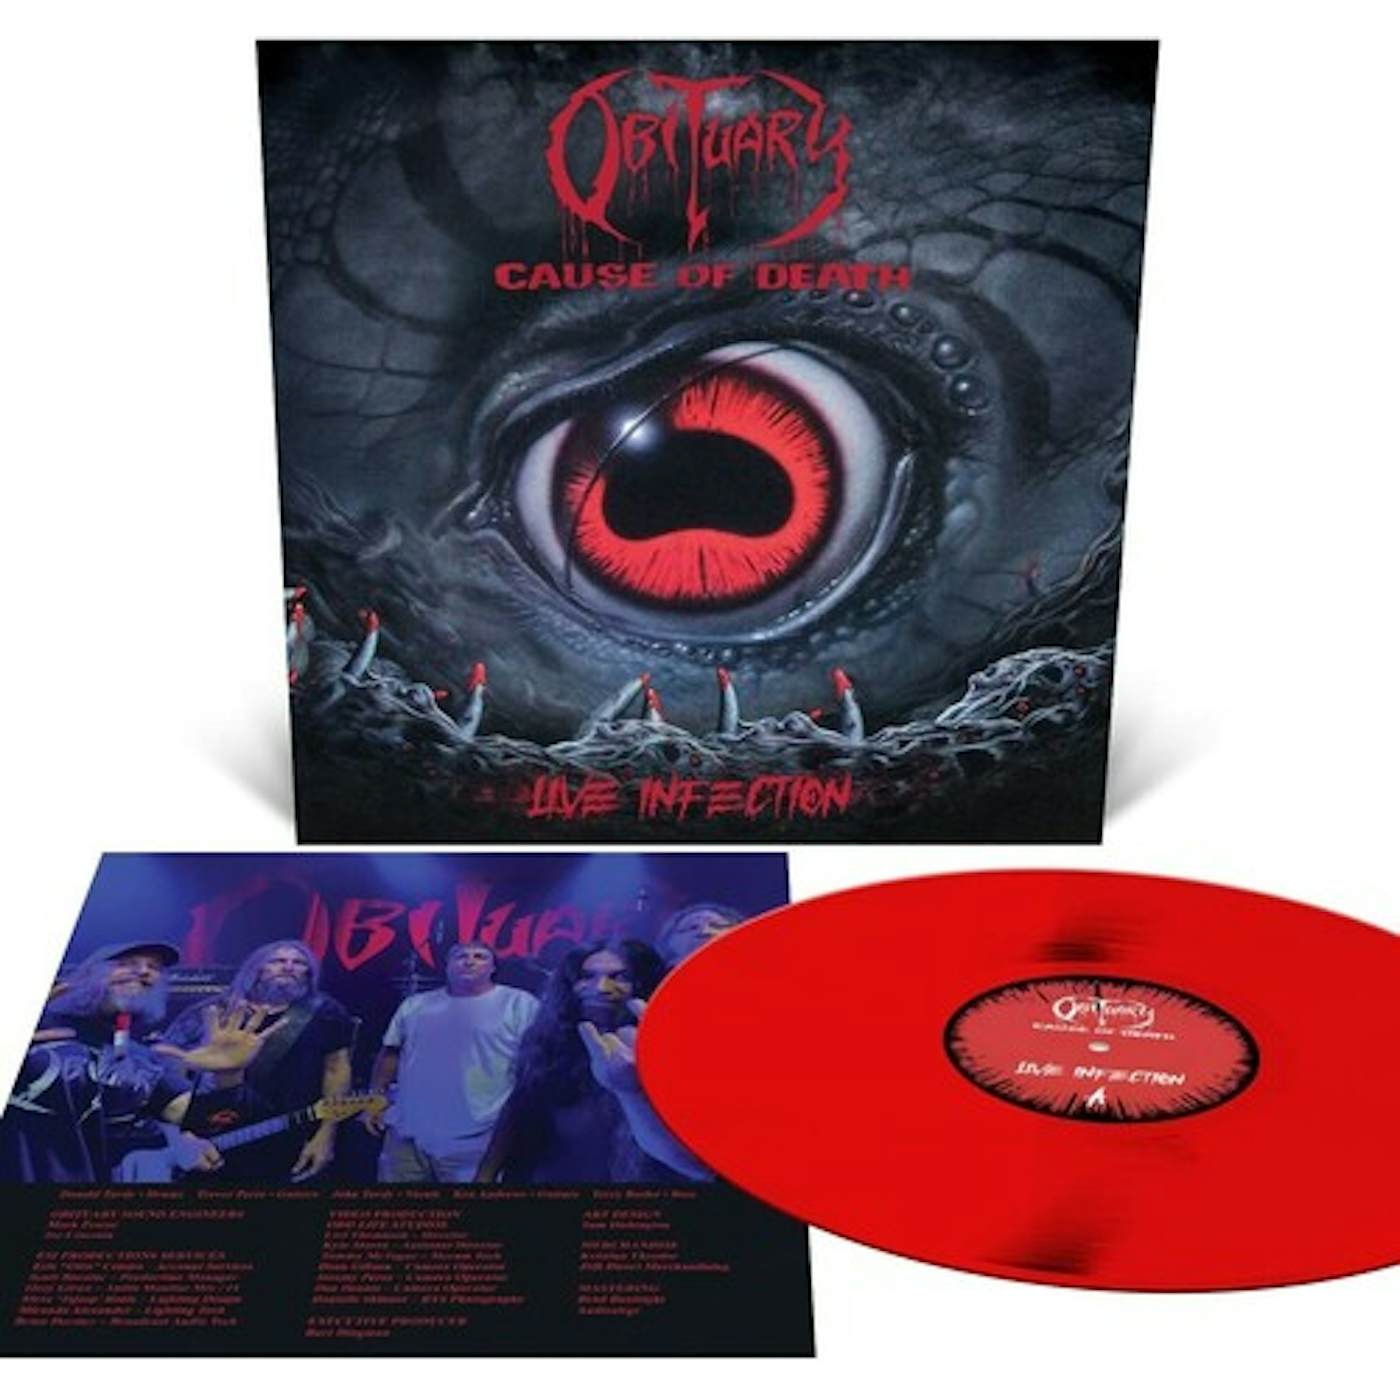 Obituary Cause of Death - Live Infection Vinyl Record